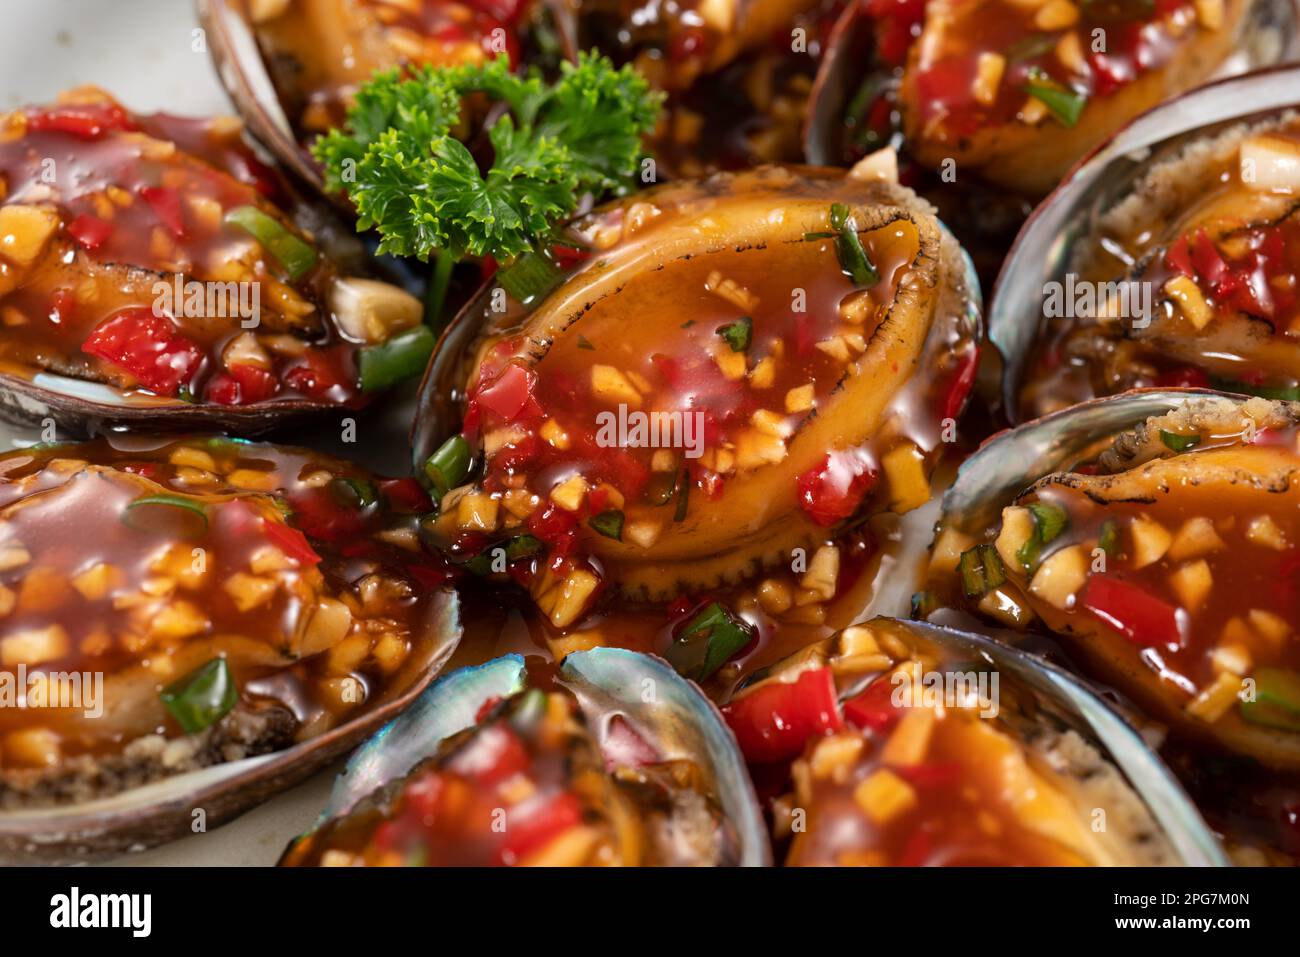 Delicious steamed abalone with spicy tomato sauce, Taiwanese five flavor sauce on wooden table background. Stock Photo